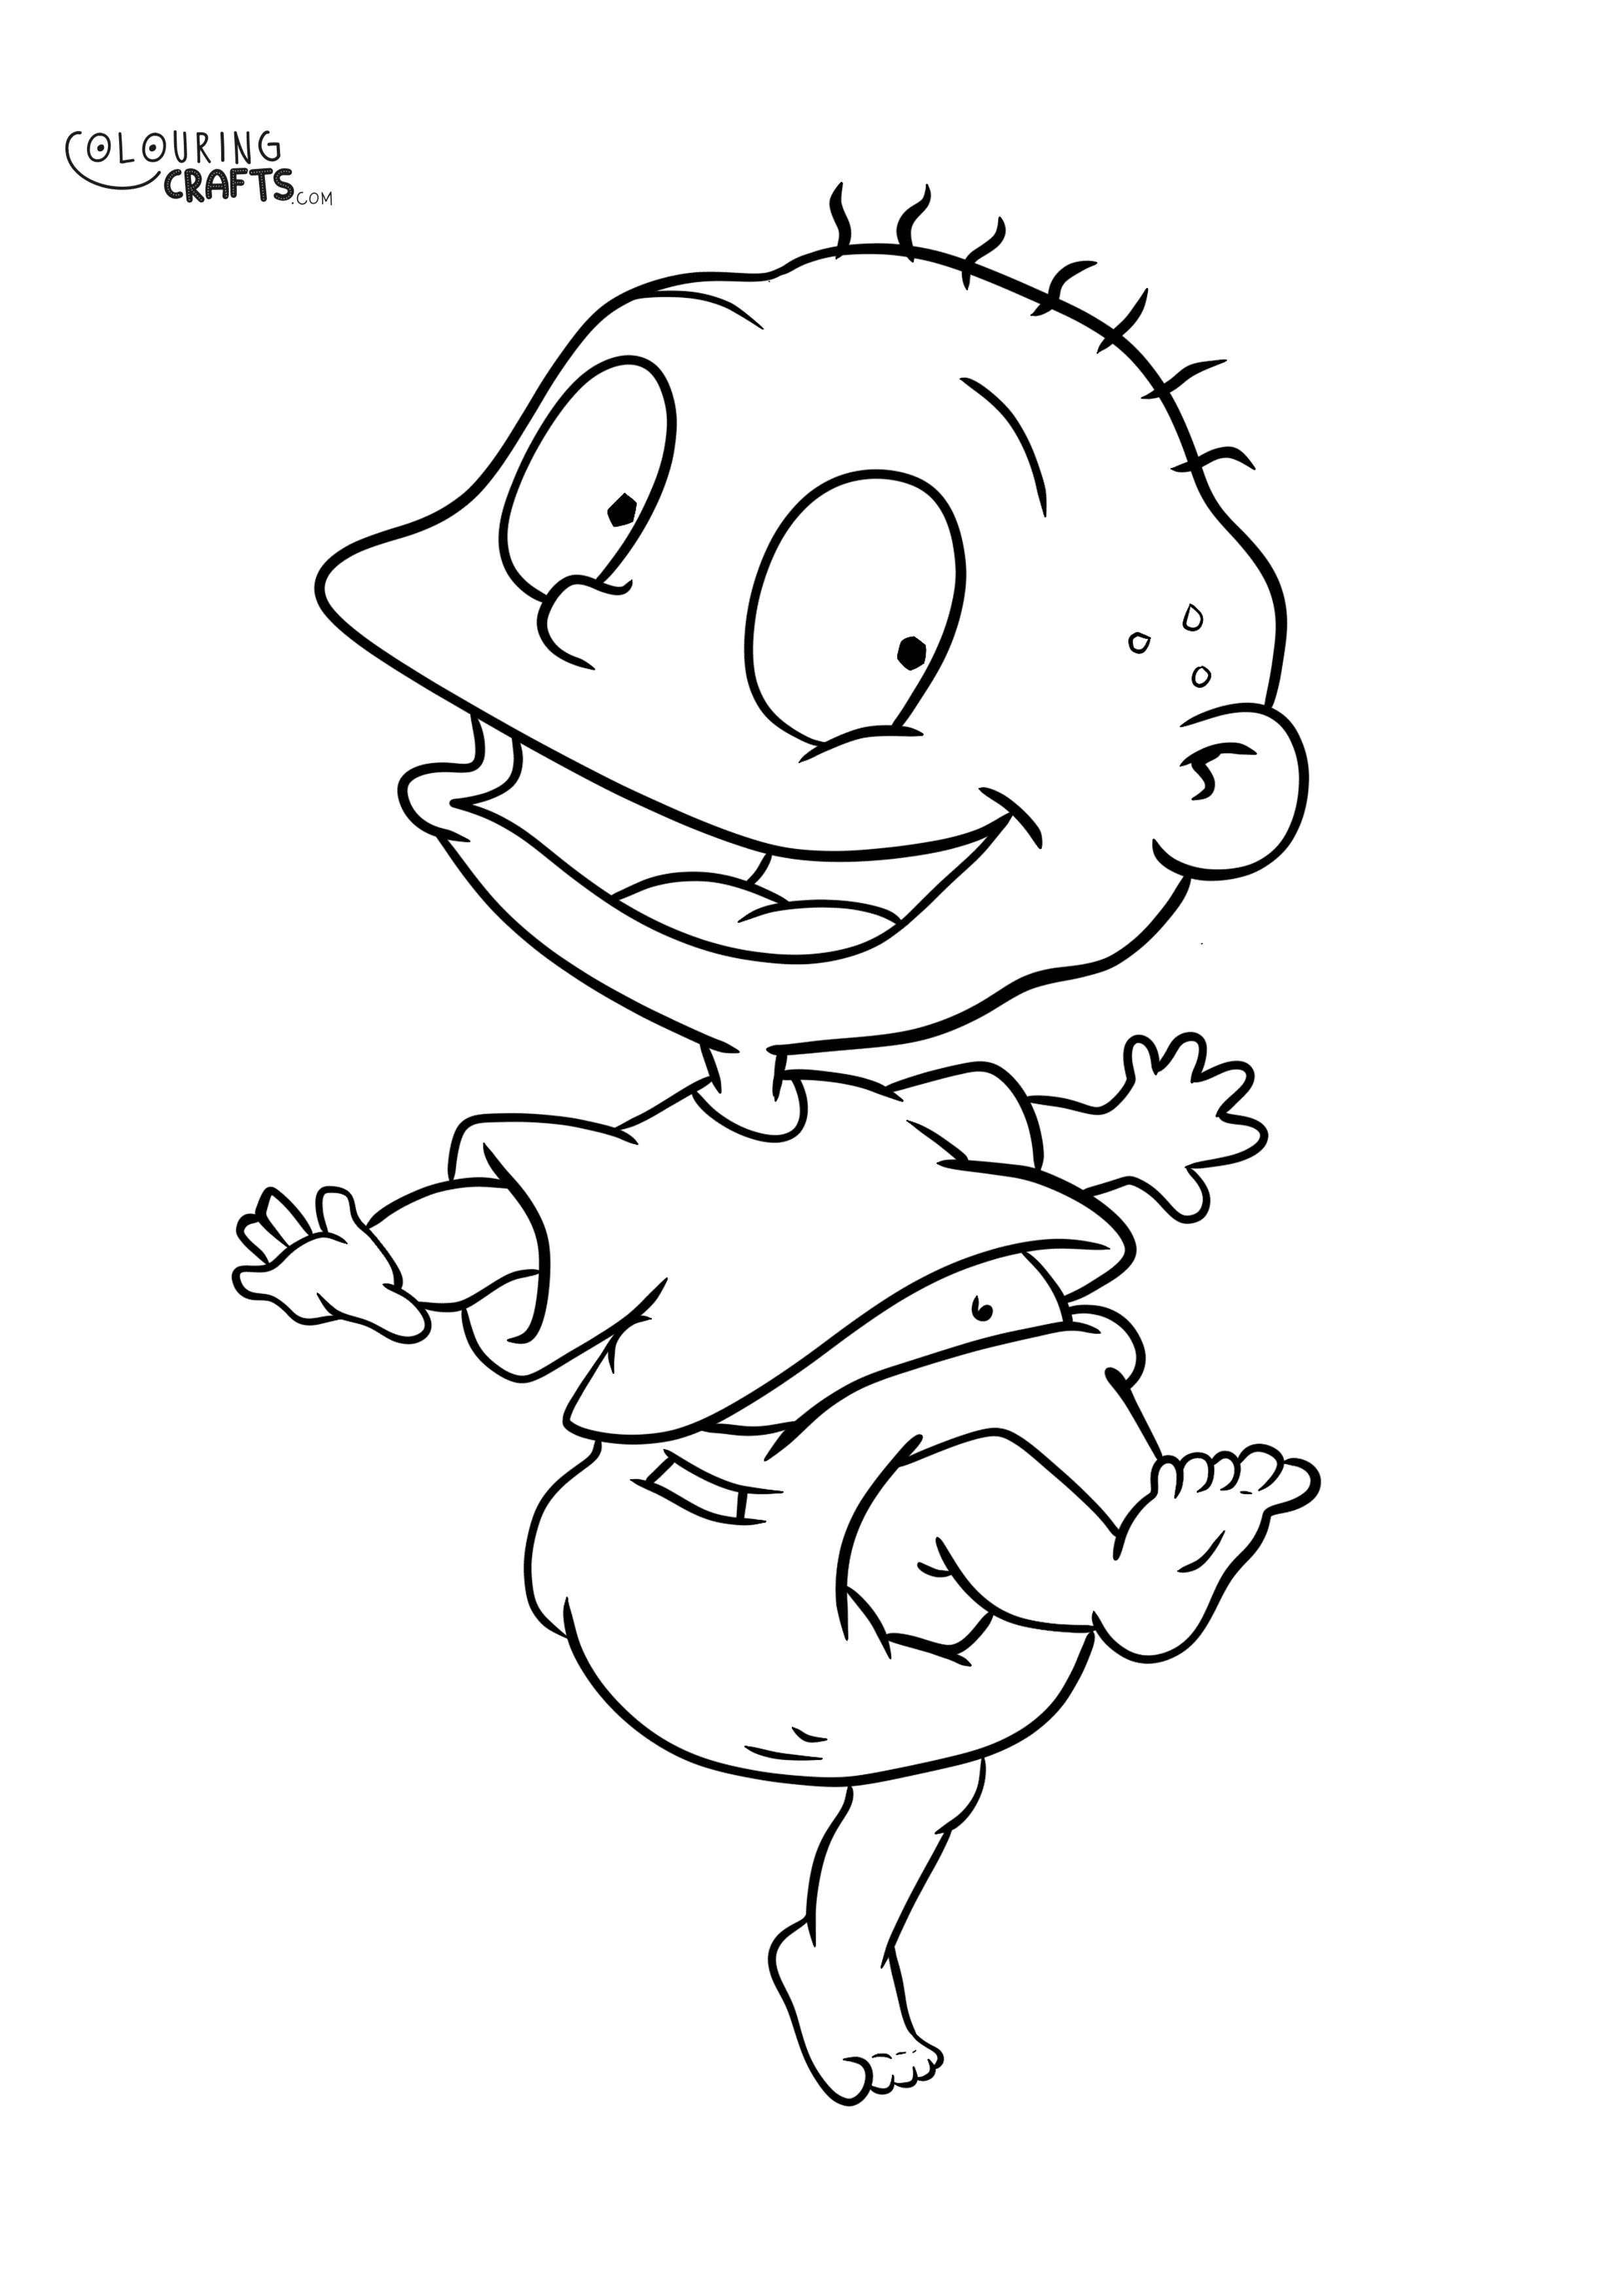 Tommy Pickles Rugrats Colouring Page Colouring Crafts 0633